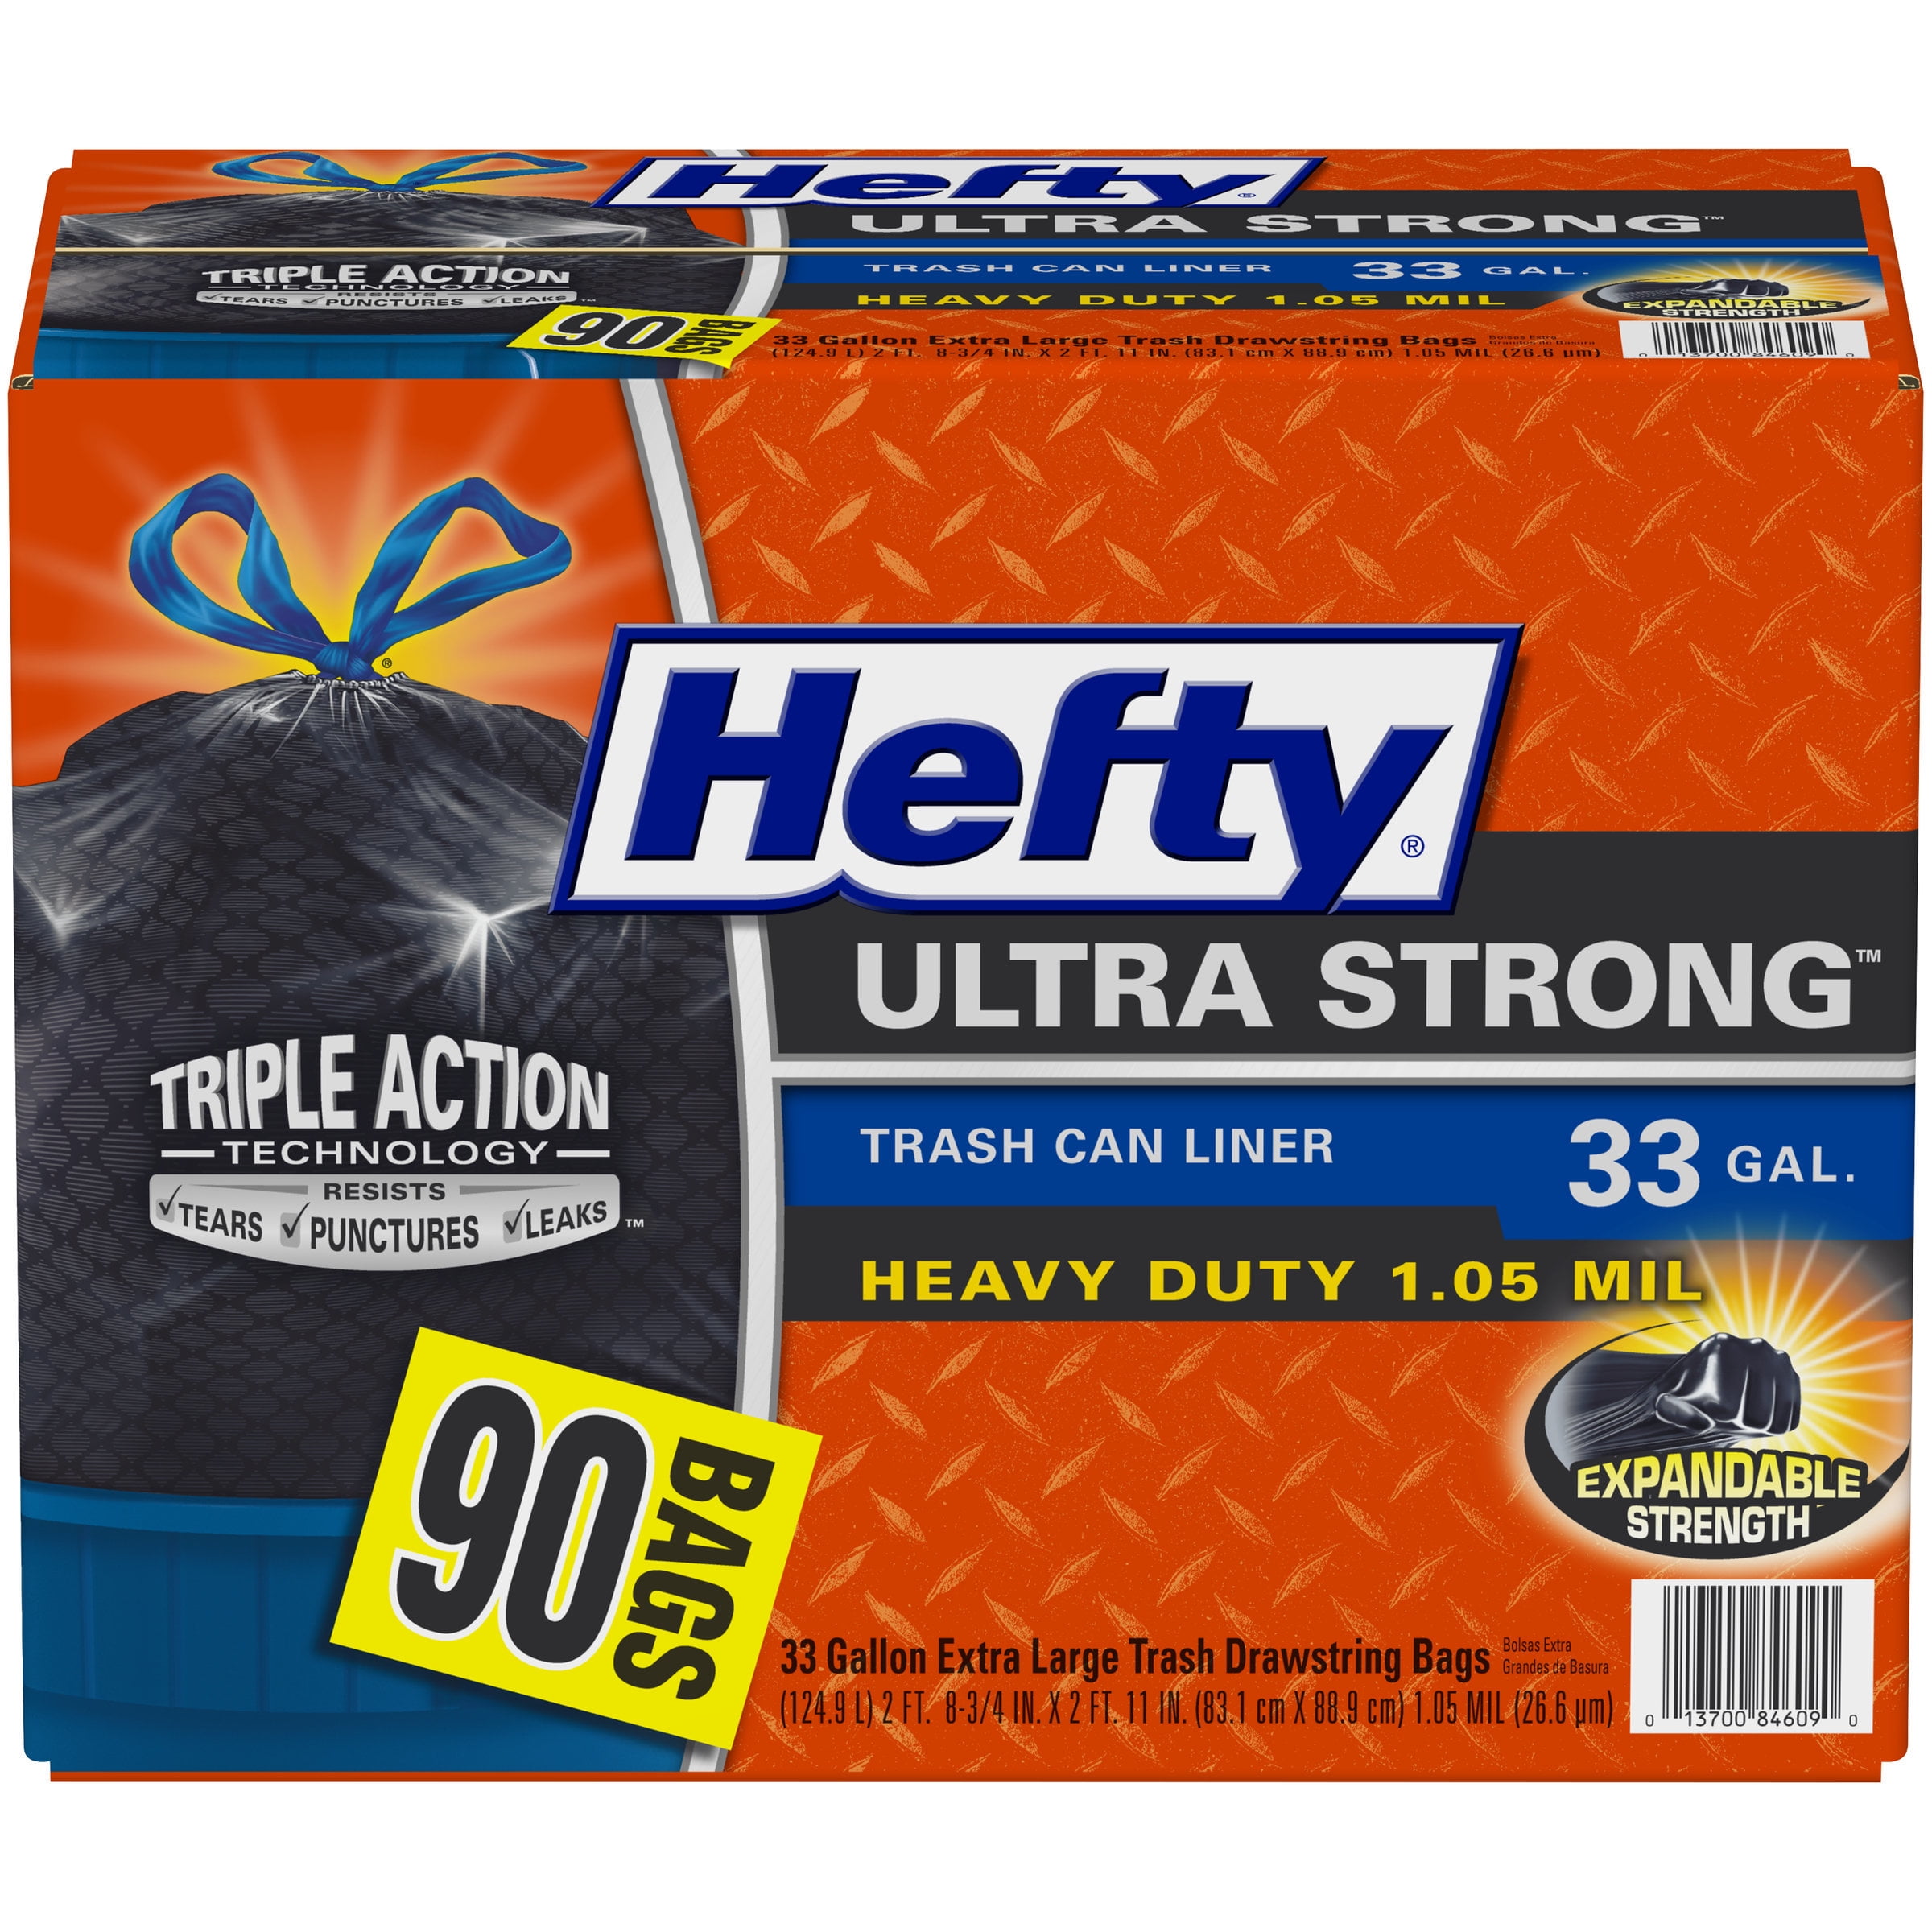 90 ct. Hefty Ultra Strong 33 Gallon Trash Bags Great for Restaurants STK #5000 